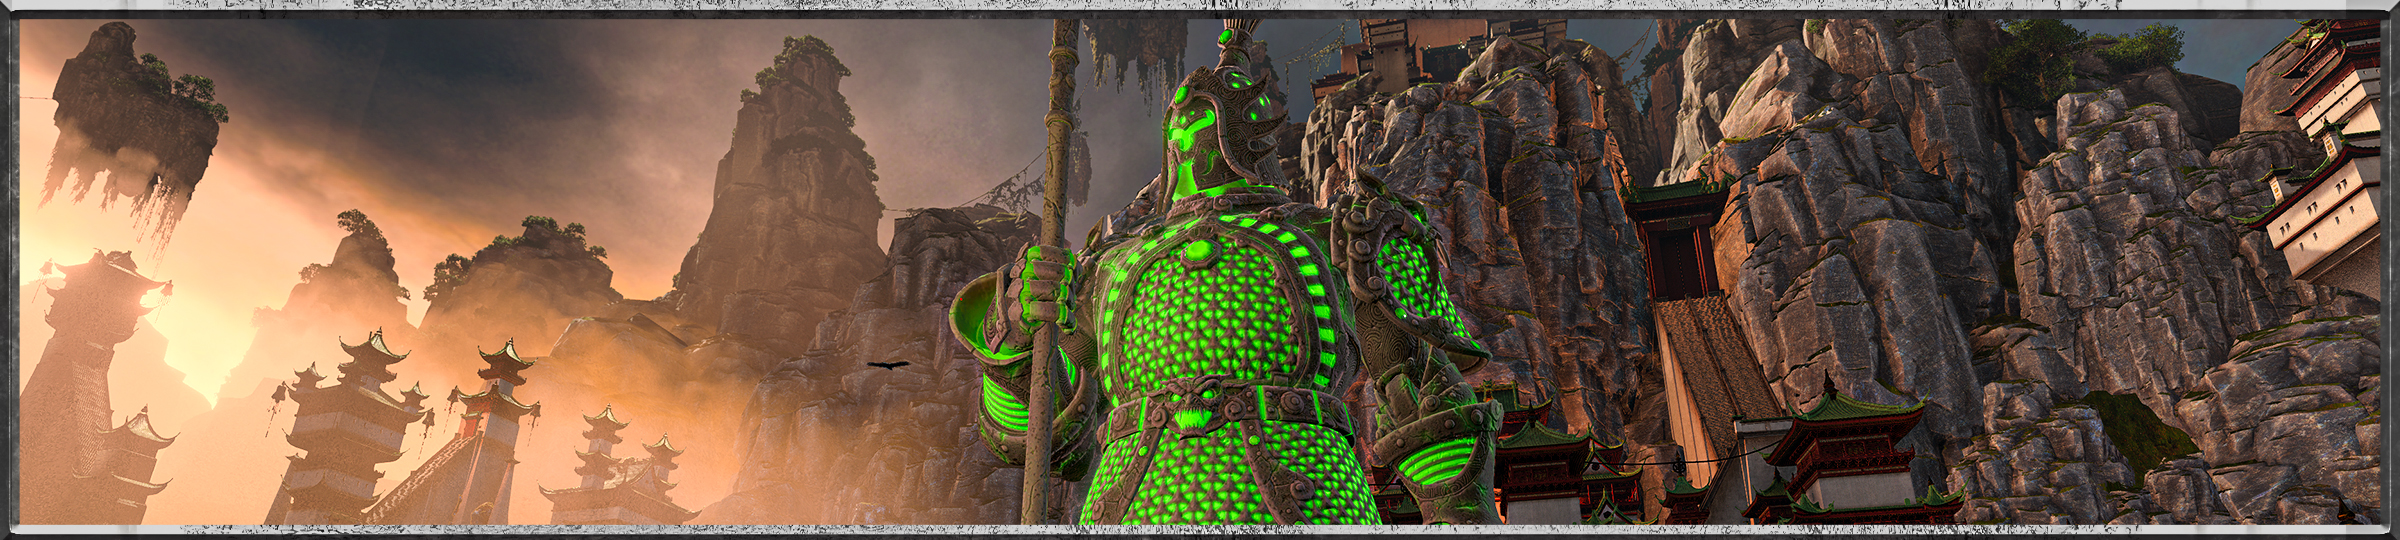 A lone Terracotta Sentinel stands centrally in the picture, a green aura shining through the gaps in its ornamental armour. In the background, a rocky outcrop with scattered embedded buildings can be seen to the right, while the left shows a city skyline of oriental buildings illuminated by the orange mist of dawn.